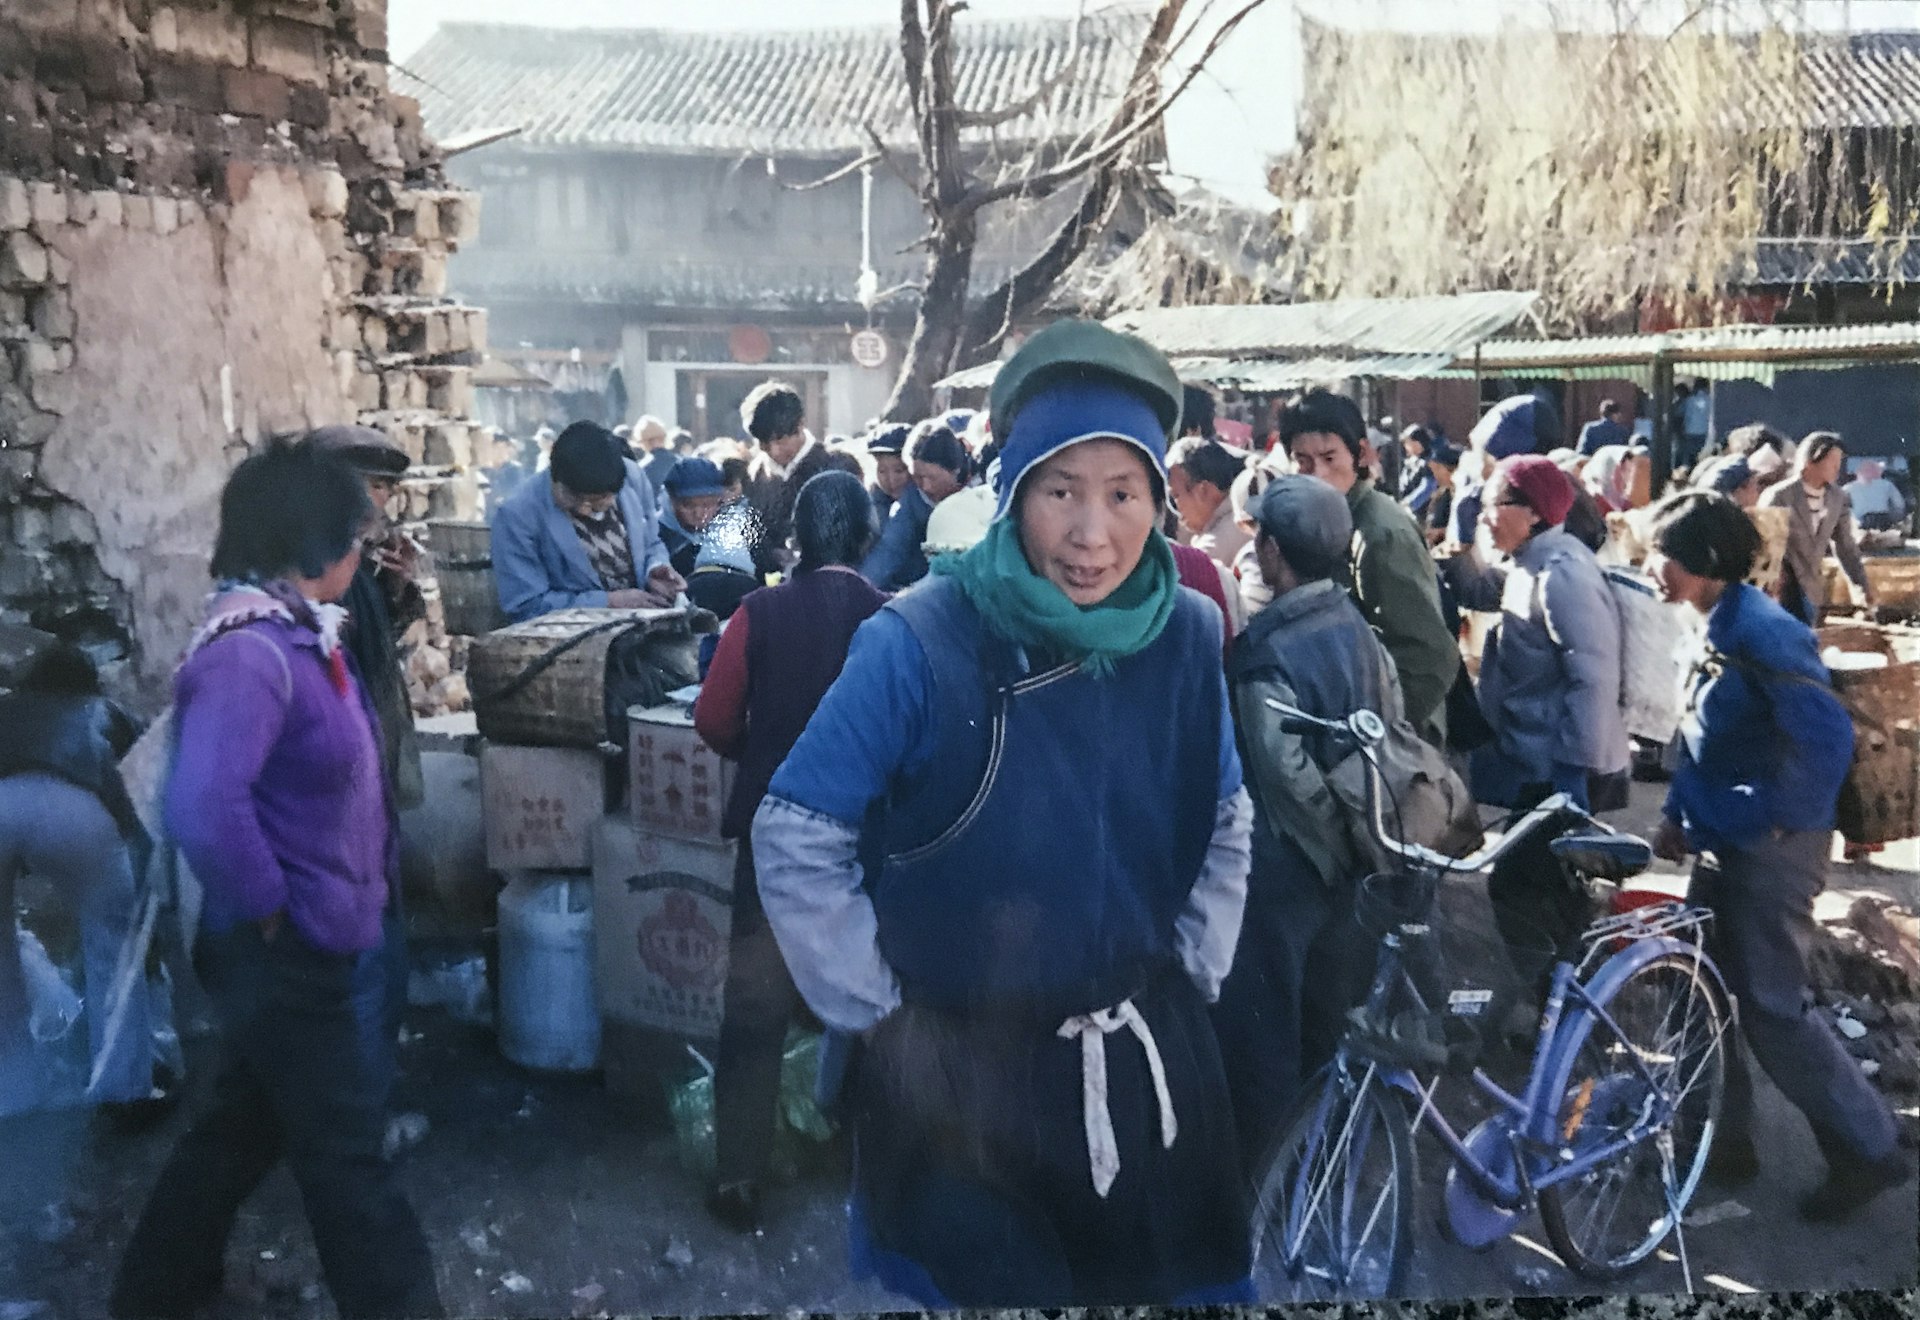 A scene of the heavily crowded market area. A Chinese woman in a blue jumper and hat, and black apron, stands in the foreground staring at the camera.